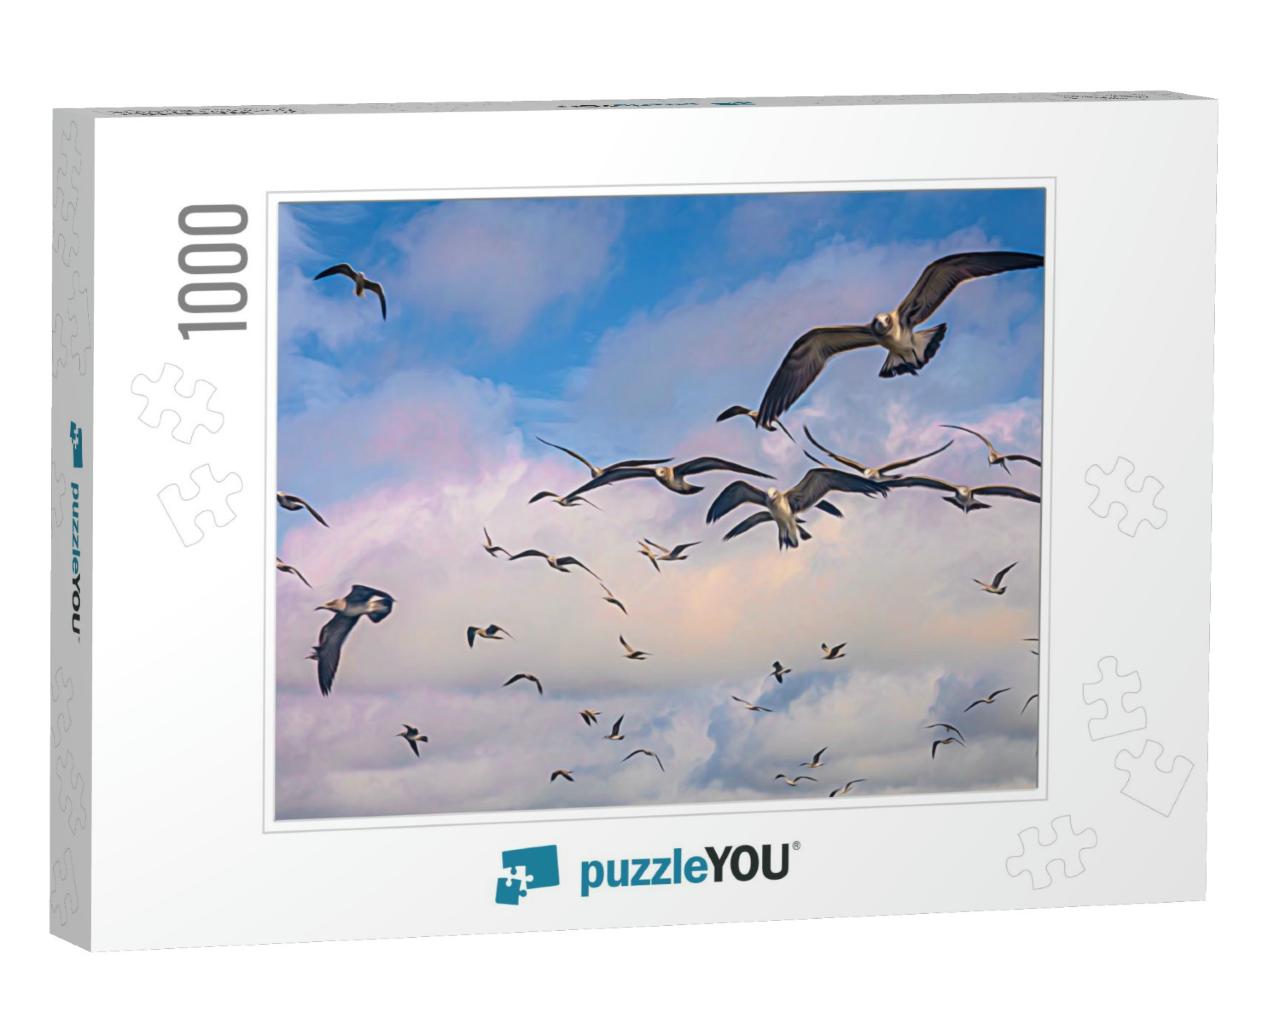 Flock of Seagulls, Probably Laughing Gulls Binomial Name... Jigsaw Puzzle with 1000 pieces